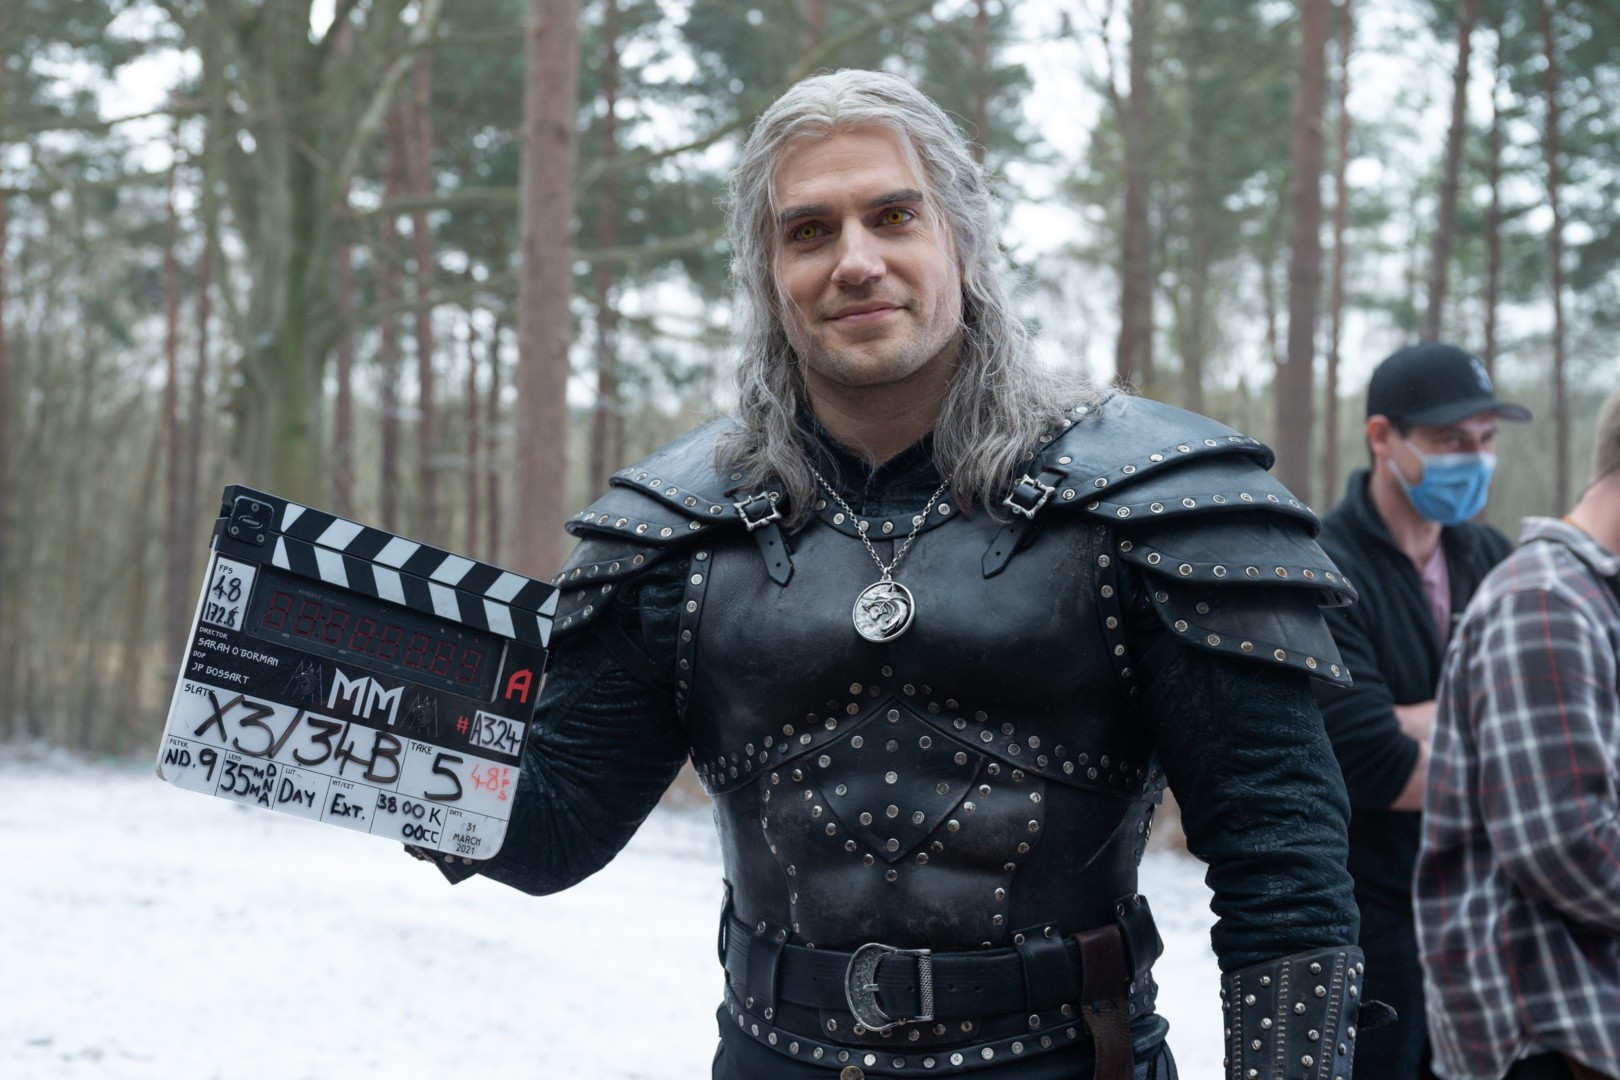 The Witcher season 2 gets a December premiere on Netflix | Games News